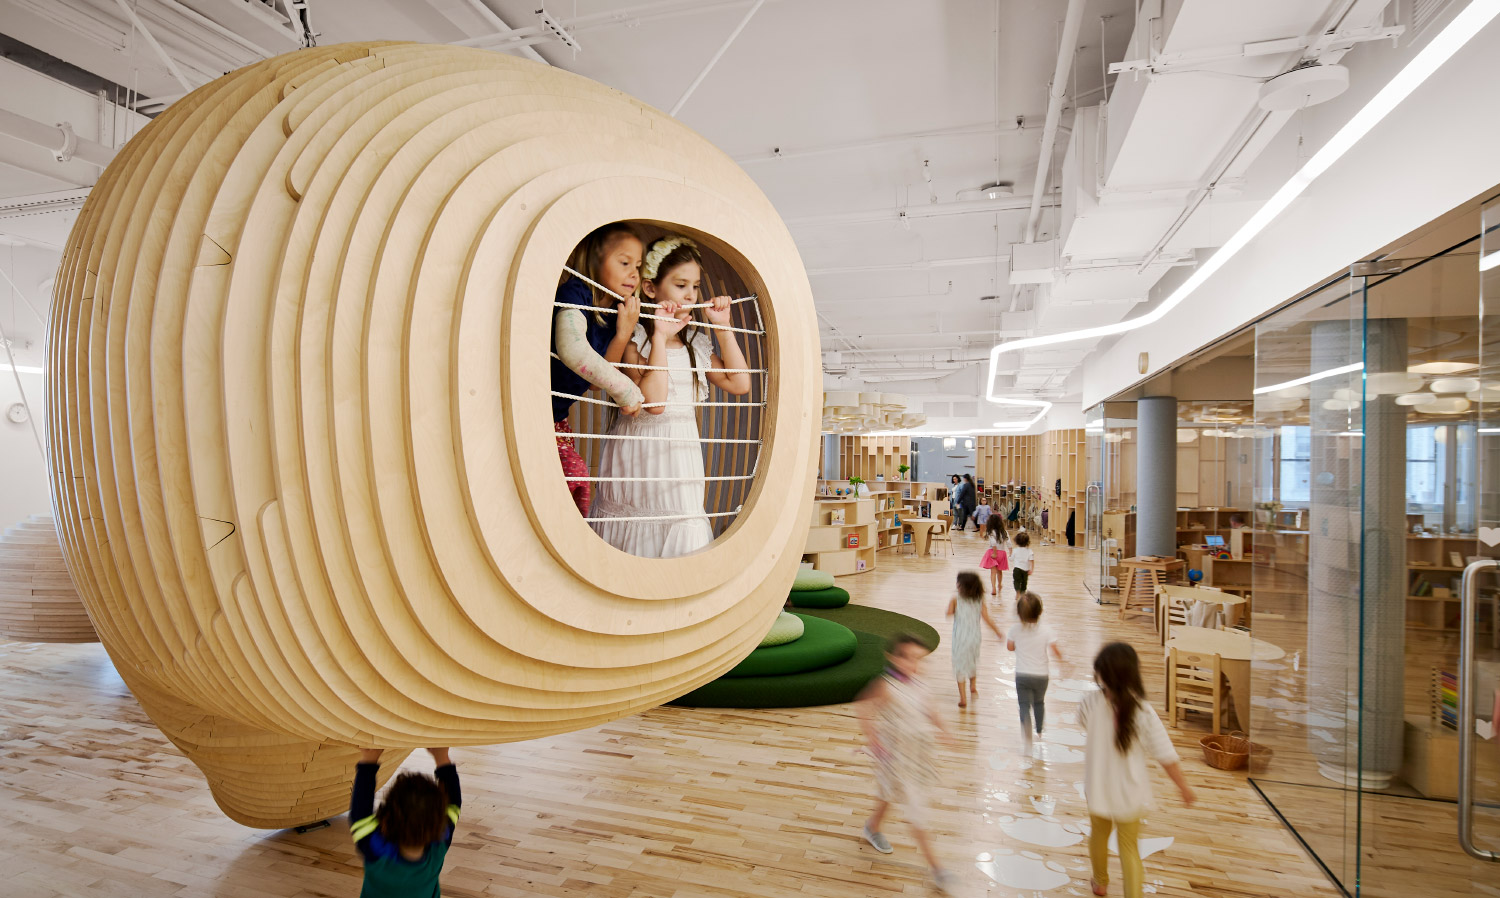 The BIG-designed WeGrow features a variety of occupiable vantage points for children to explore.